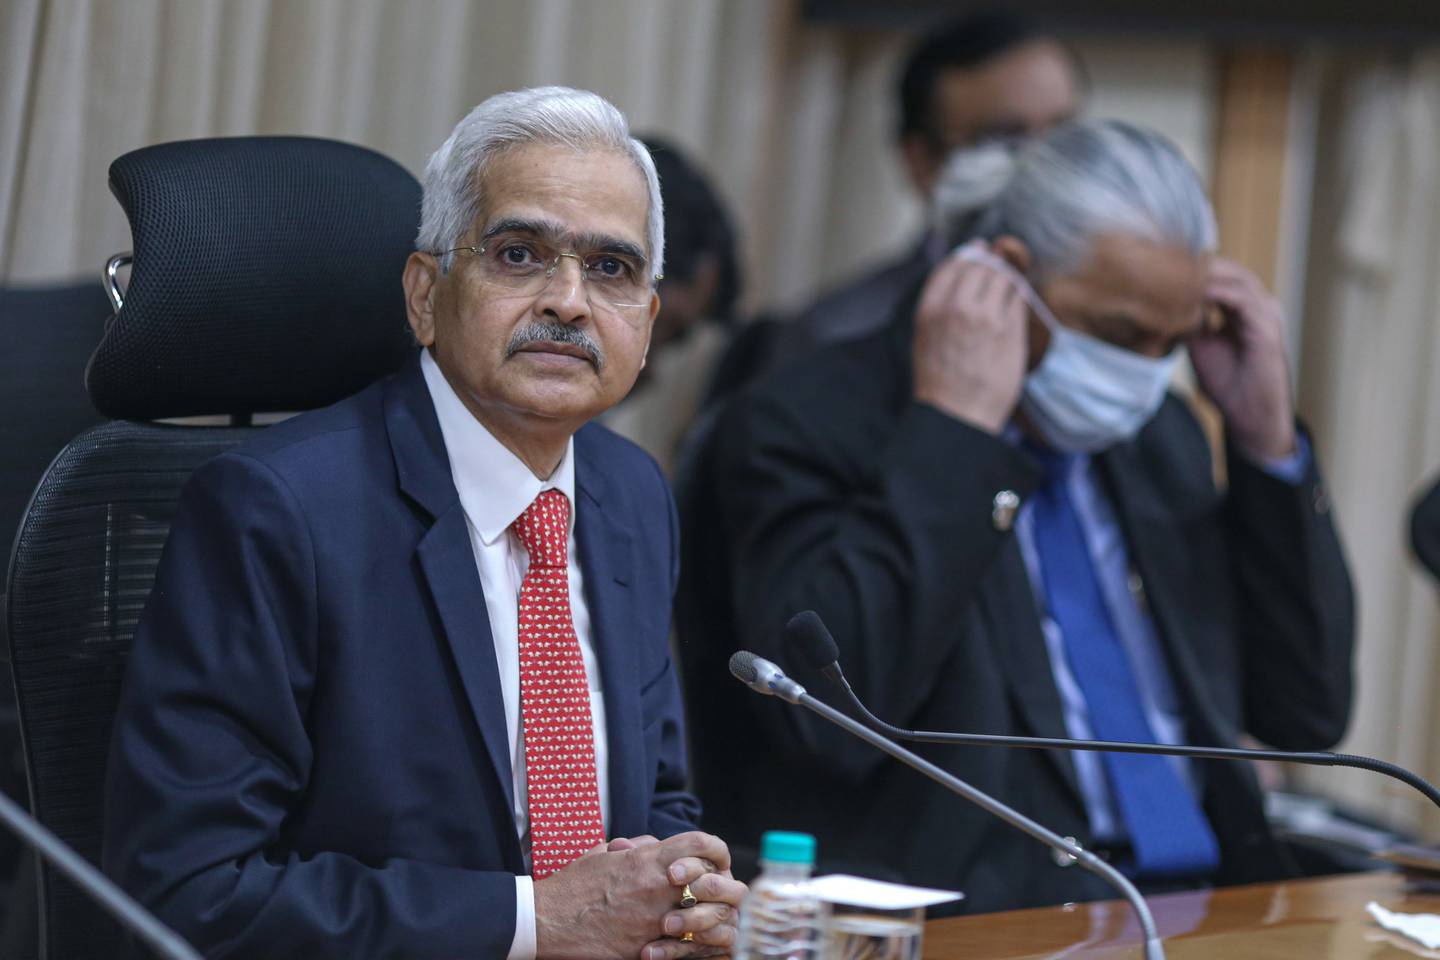 Shaktikanta Das, governor of the Reserve Bank of India speaks after the central bank's monetary policy meeting this month. Bloomberg

